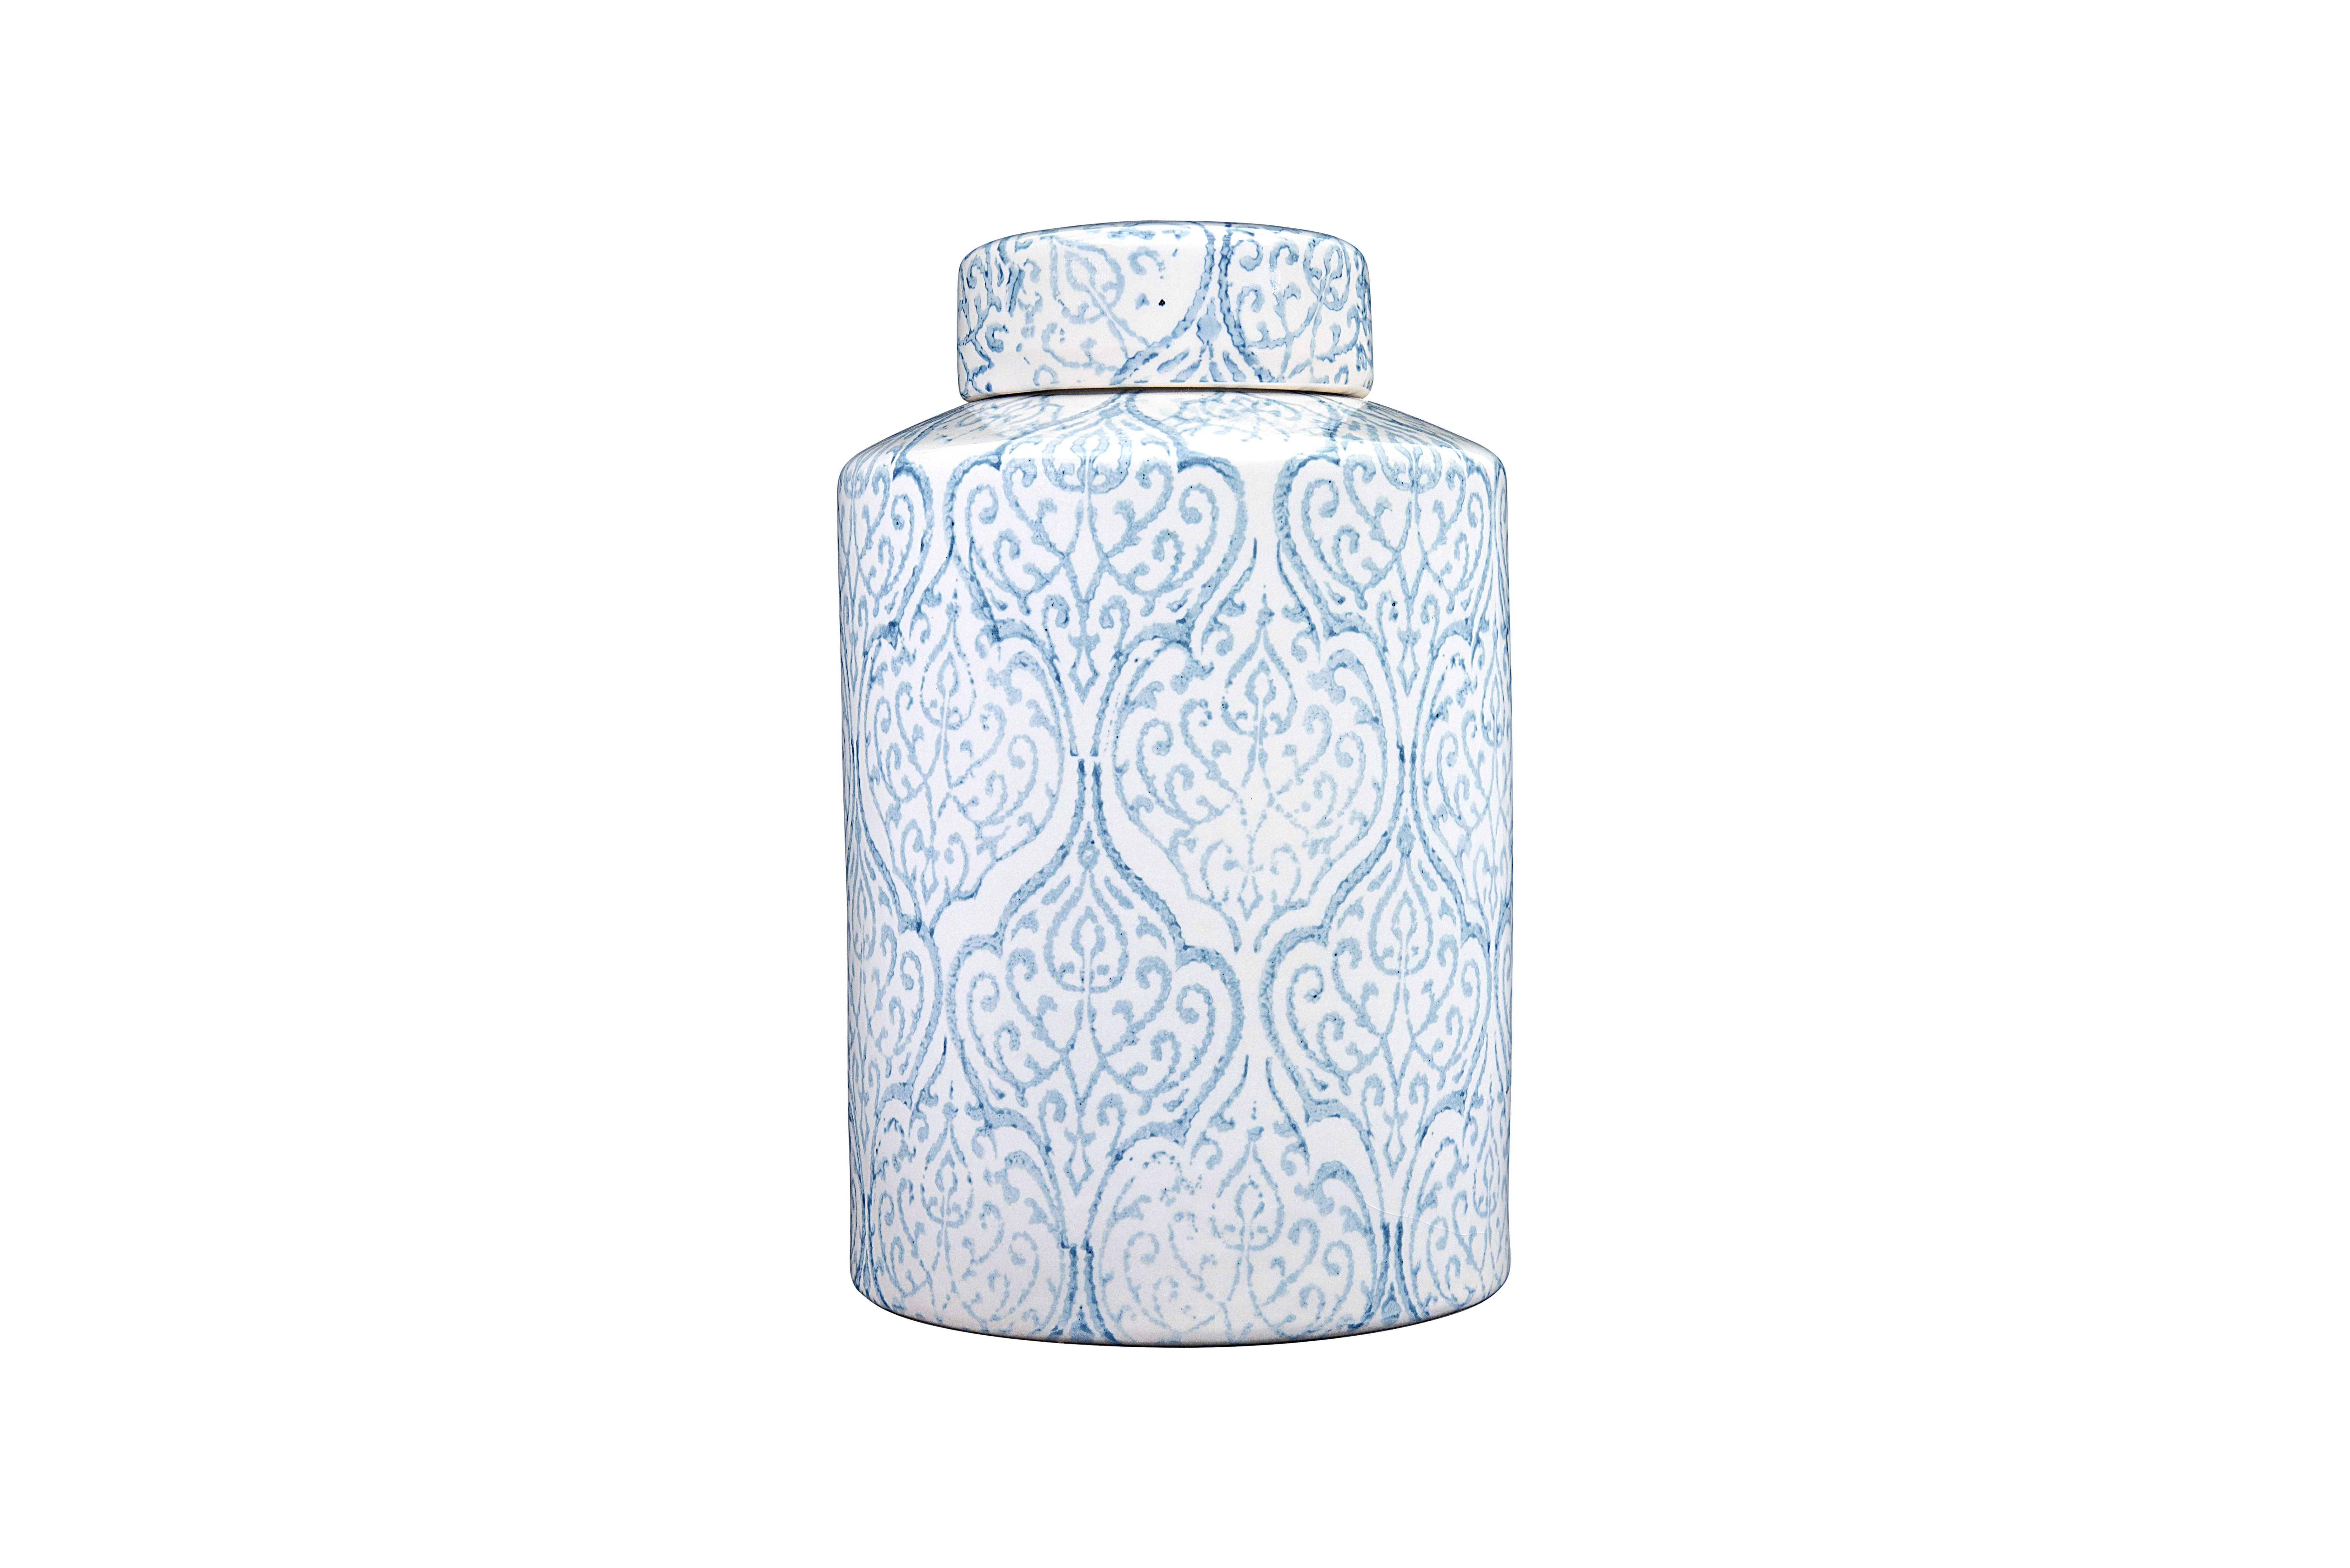 Blue & White Decorative Ginger Jar with Lid - Nomad Home